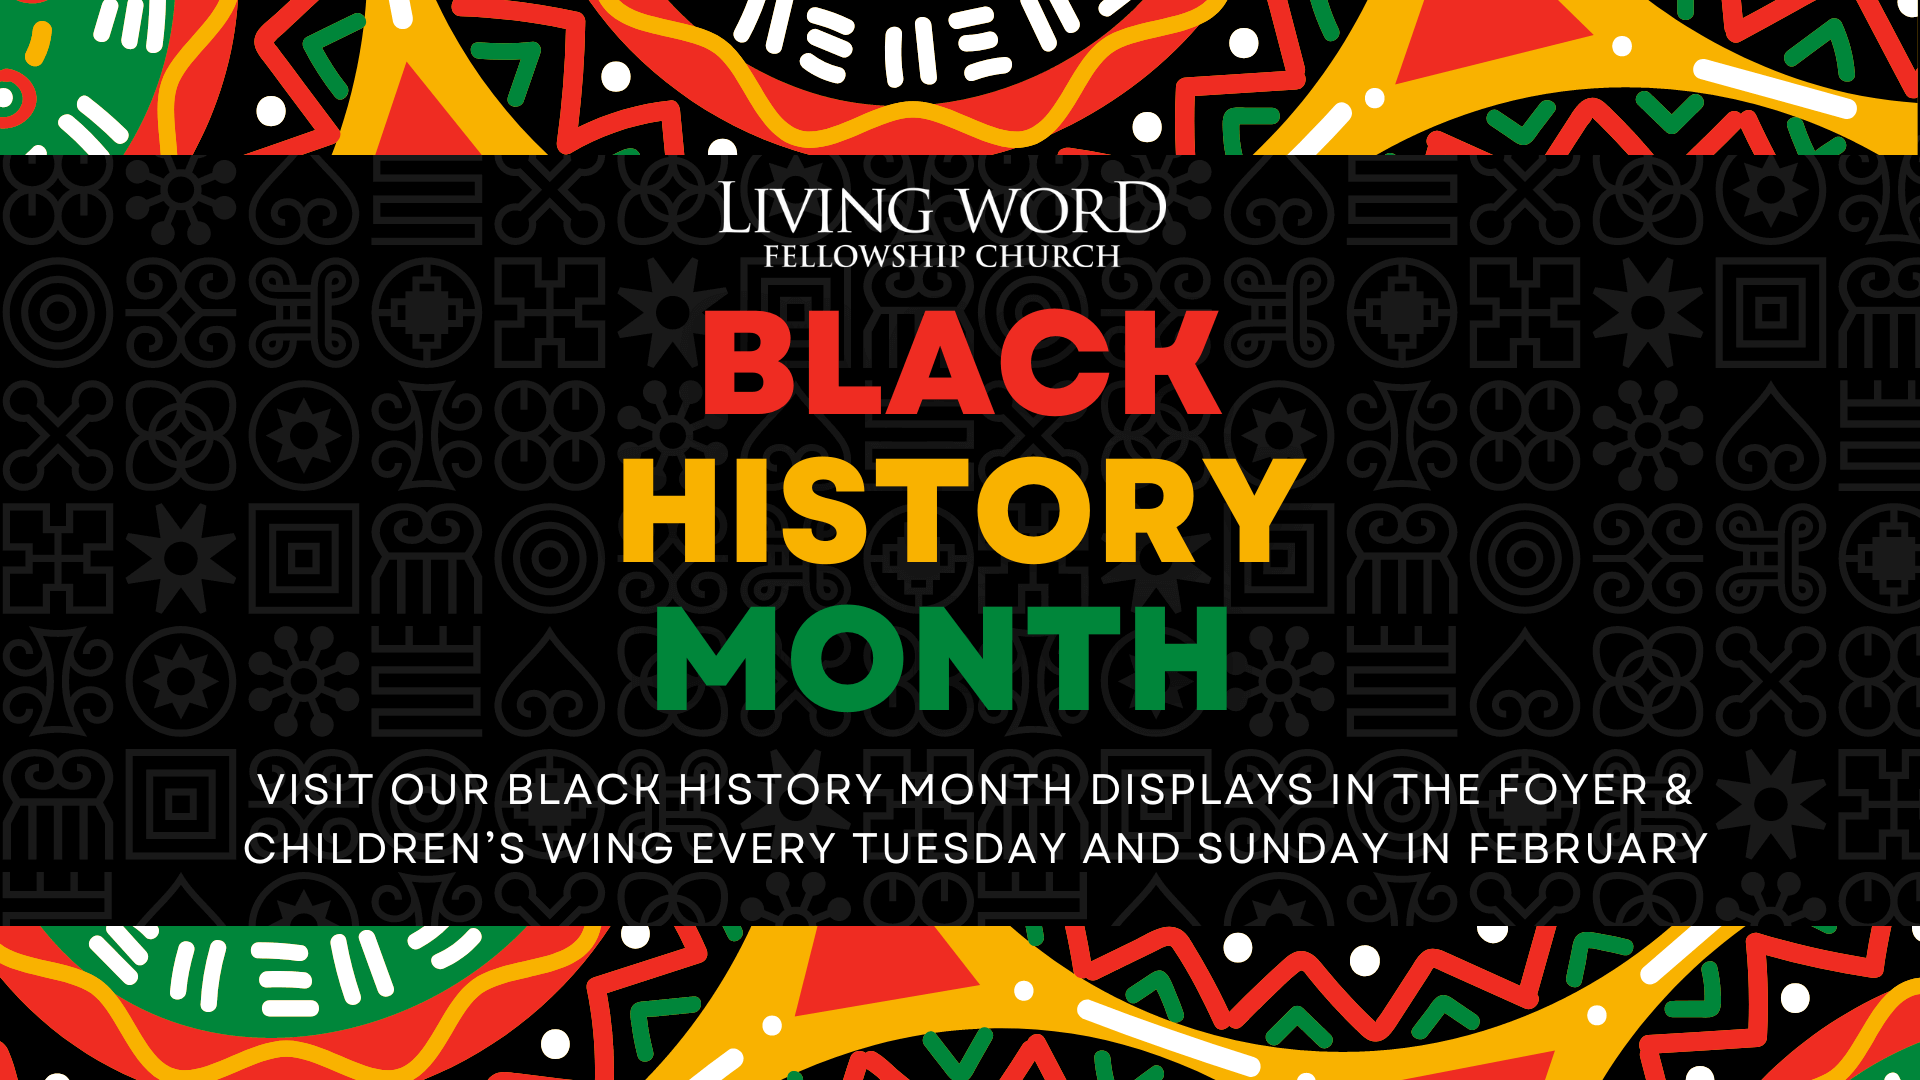 black history month, visit our displays in the foyer and children's wing every sunday and tuesday